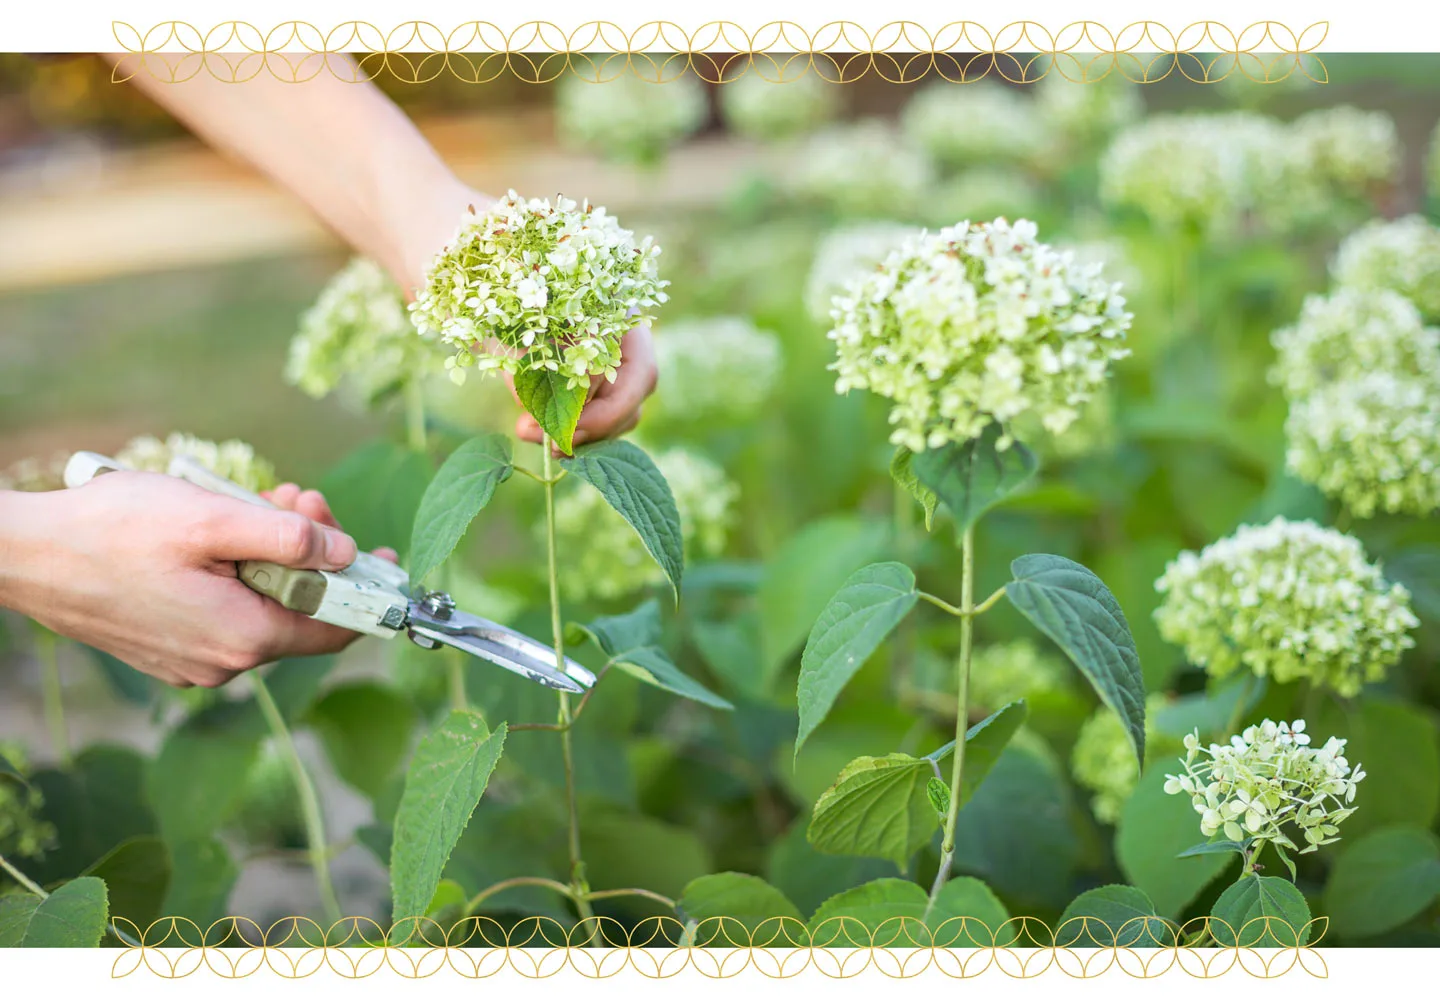 How to Care for Hydrangeas: A Complete Guide